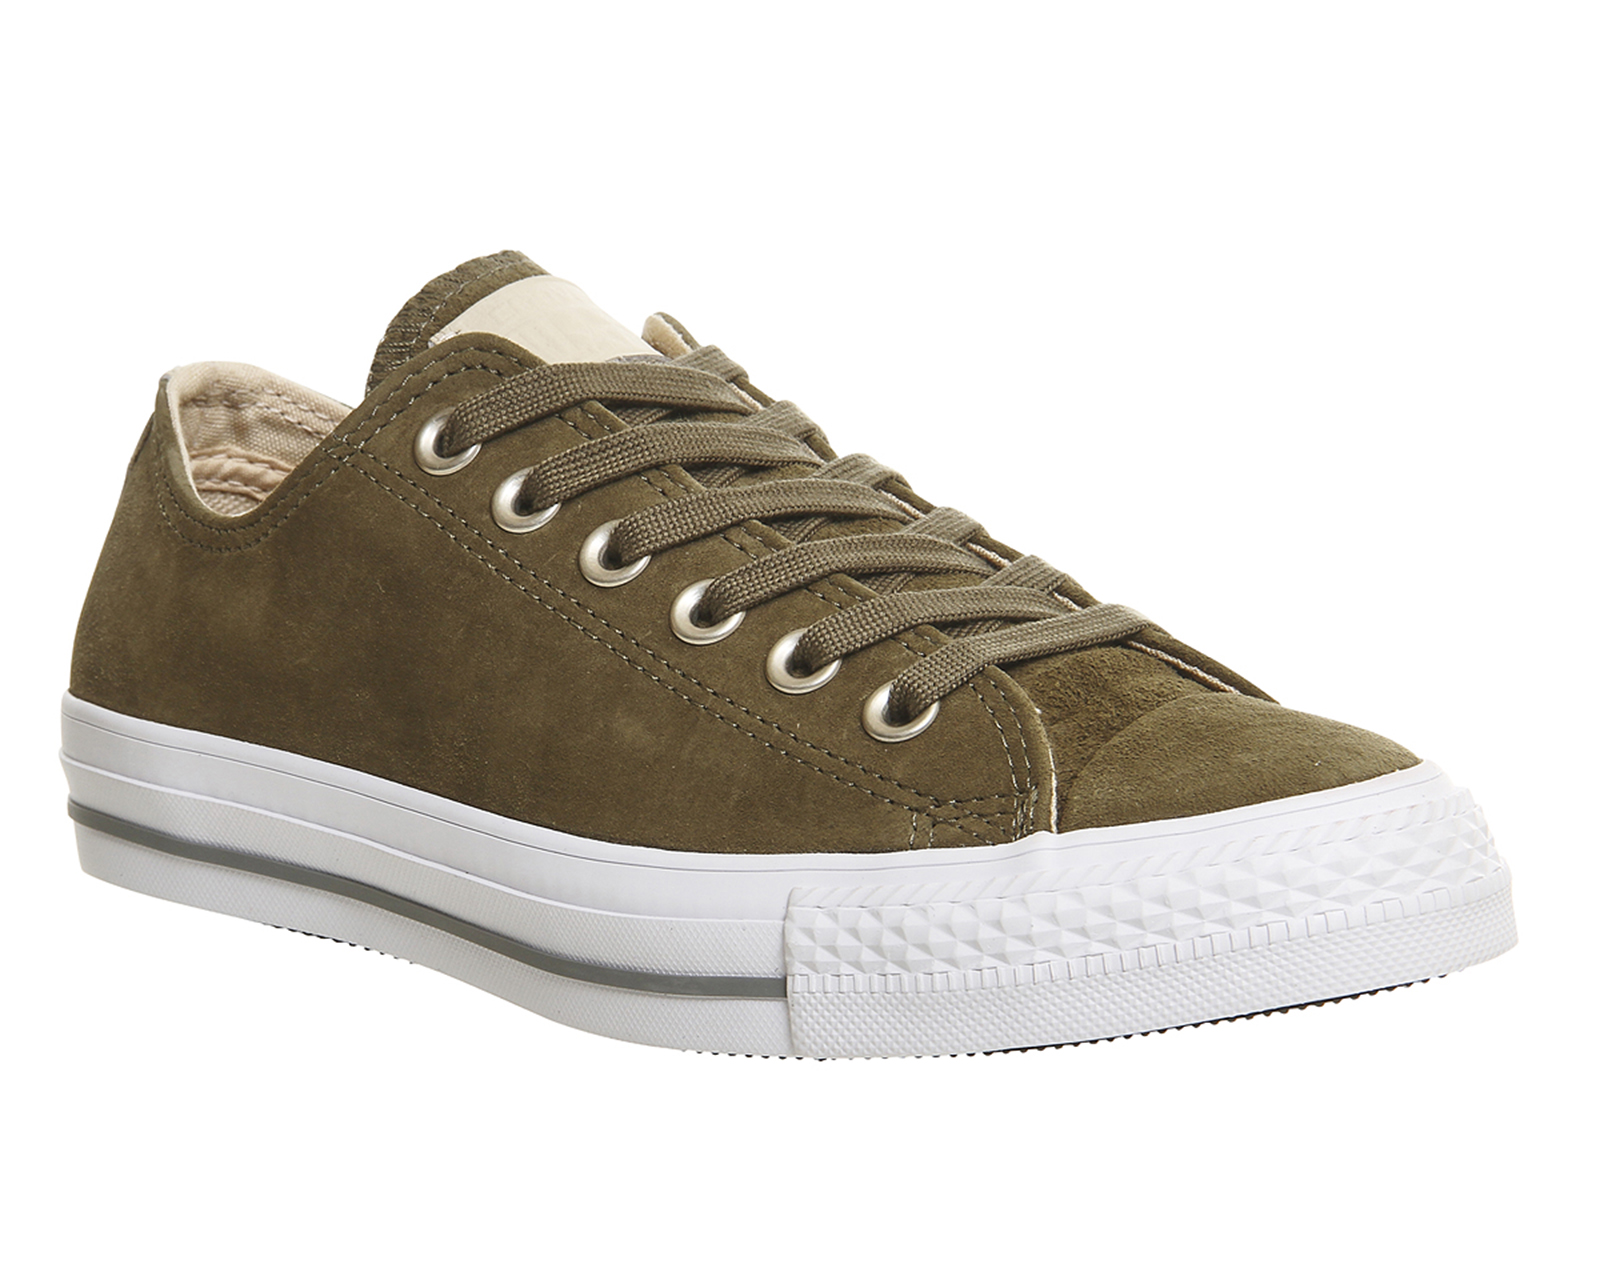 ConverseConverse All Star Low TrainersSurplus Ivory Suede